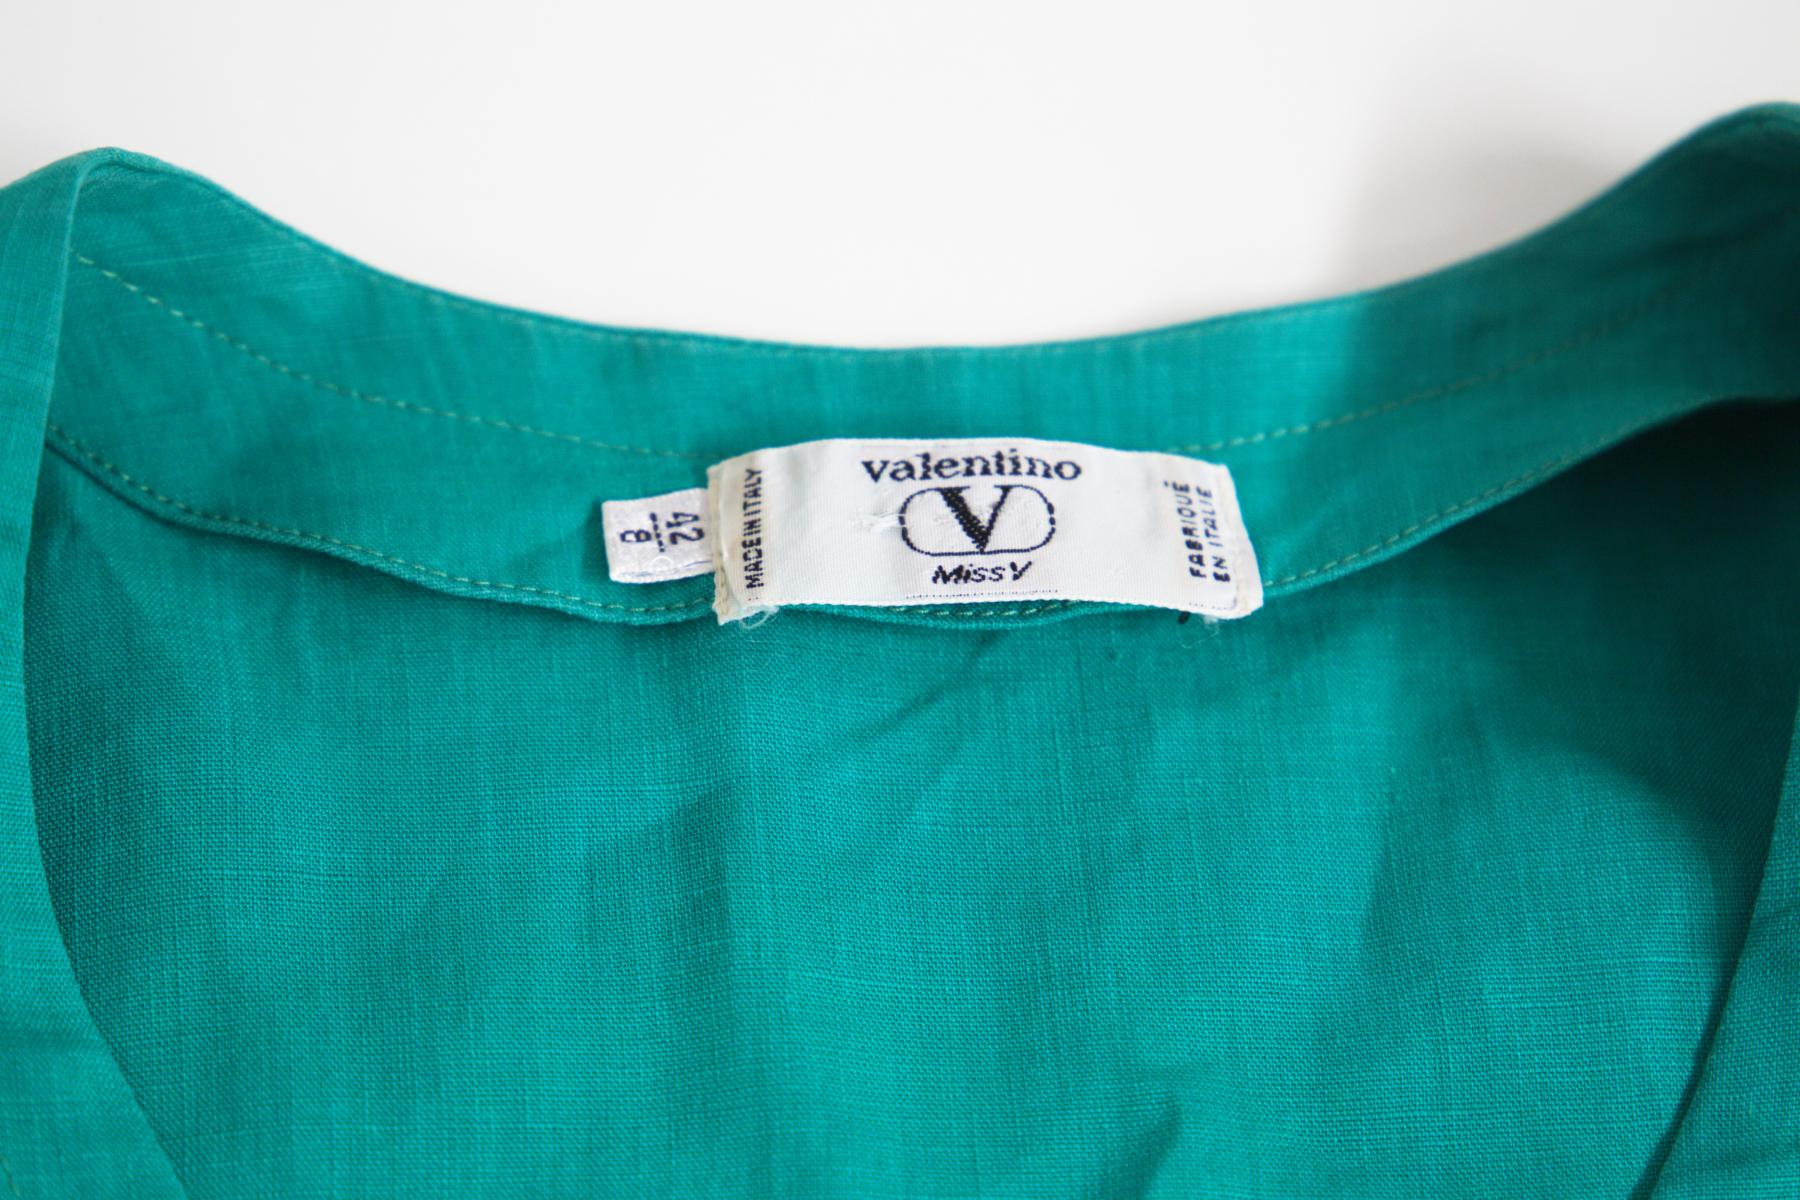 Attractive vintage linen suit by Valentino Miss V from the 1990s, made in Italy. ORIGINAL LABEL.
The suit consists of two pieces: jacket and skirt.
The jacket is short sleeved with a pronounced, yet composed, U-neckline. Completely in turquoise